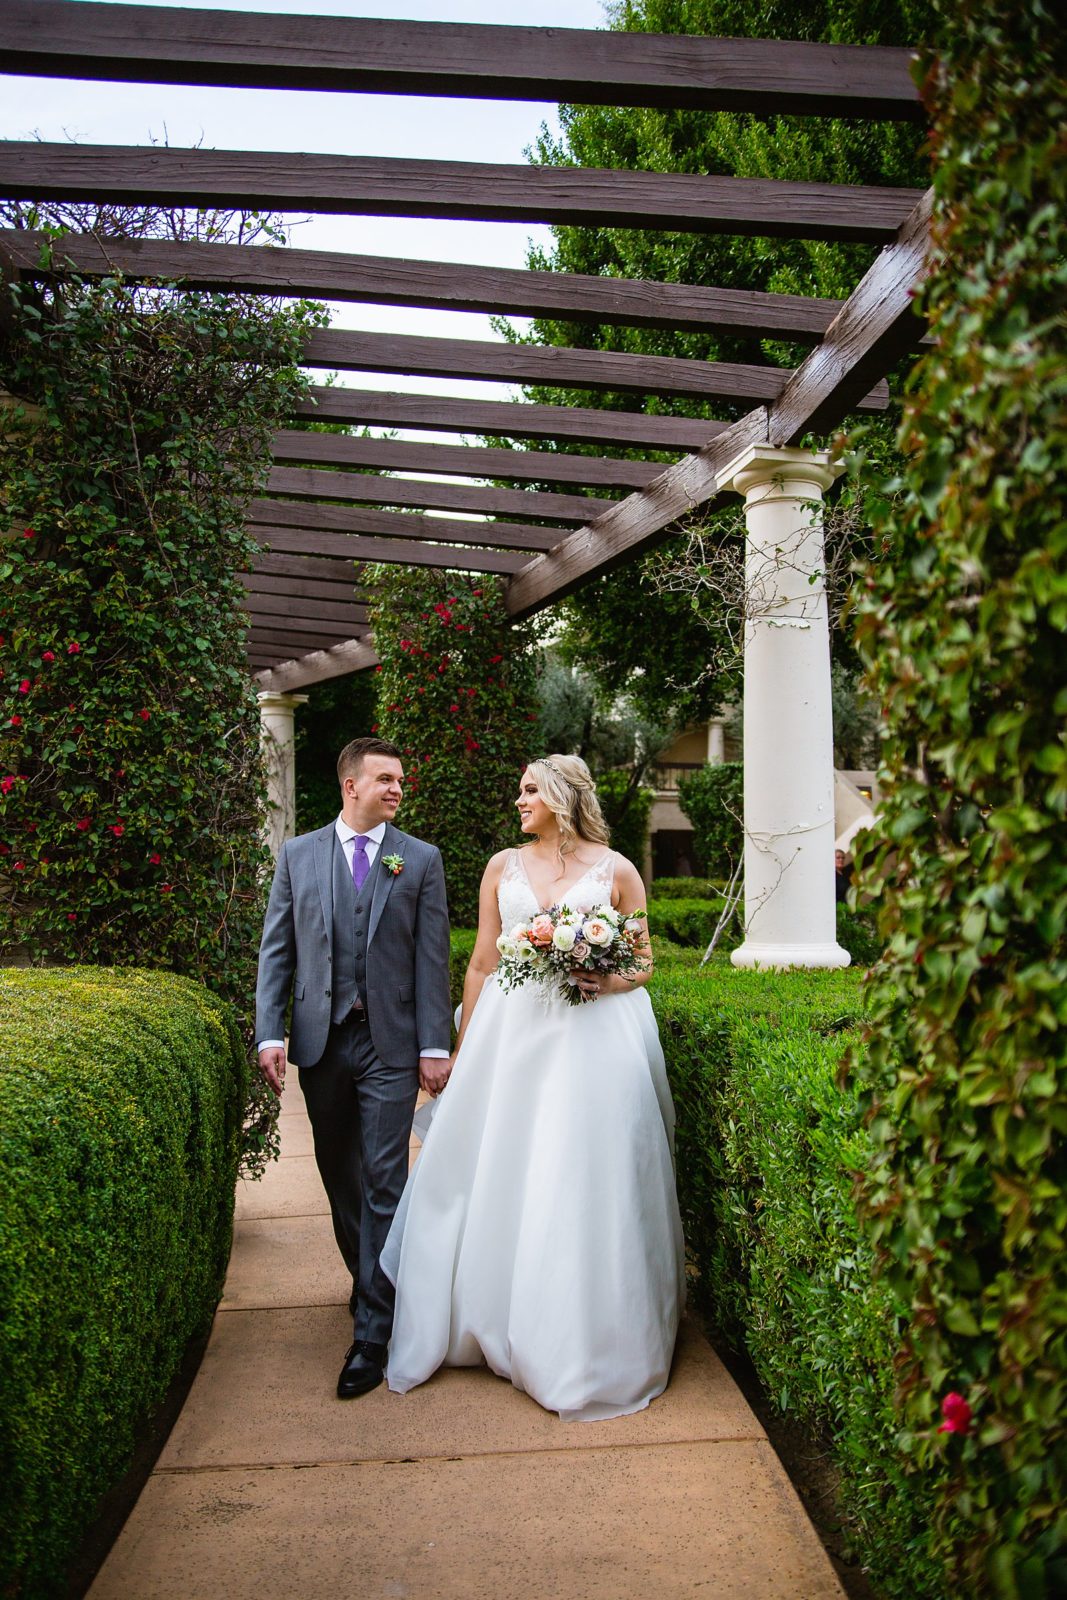 Bride and Groom walking together during their The Scottsdale Resort at McCormick Ranch wedding by Arizona wedding photographer PMA Photography.